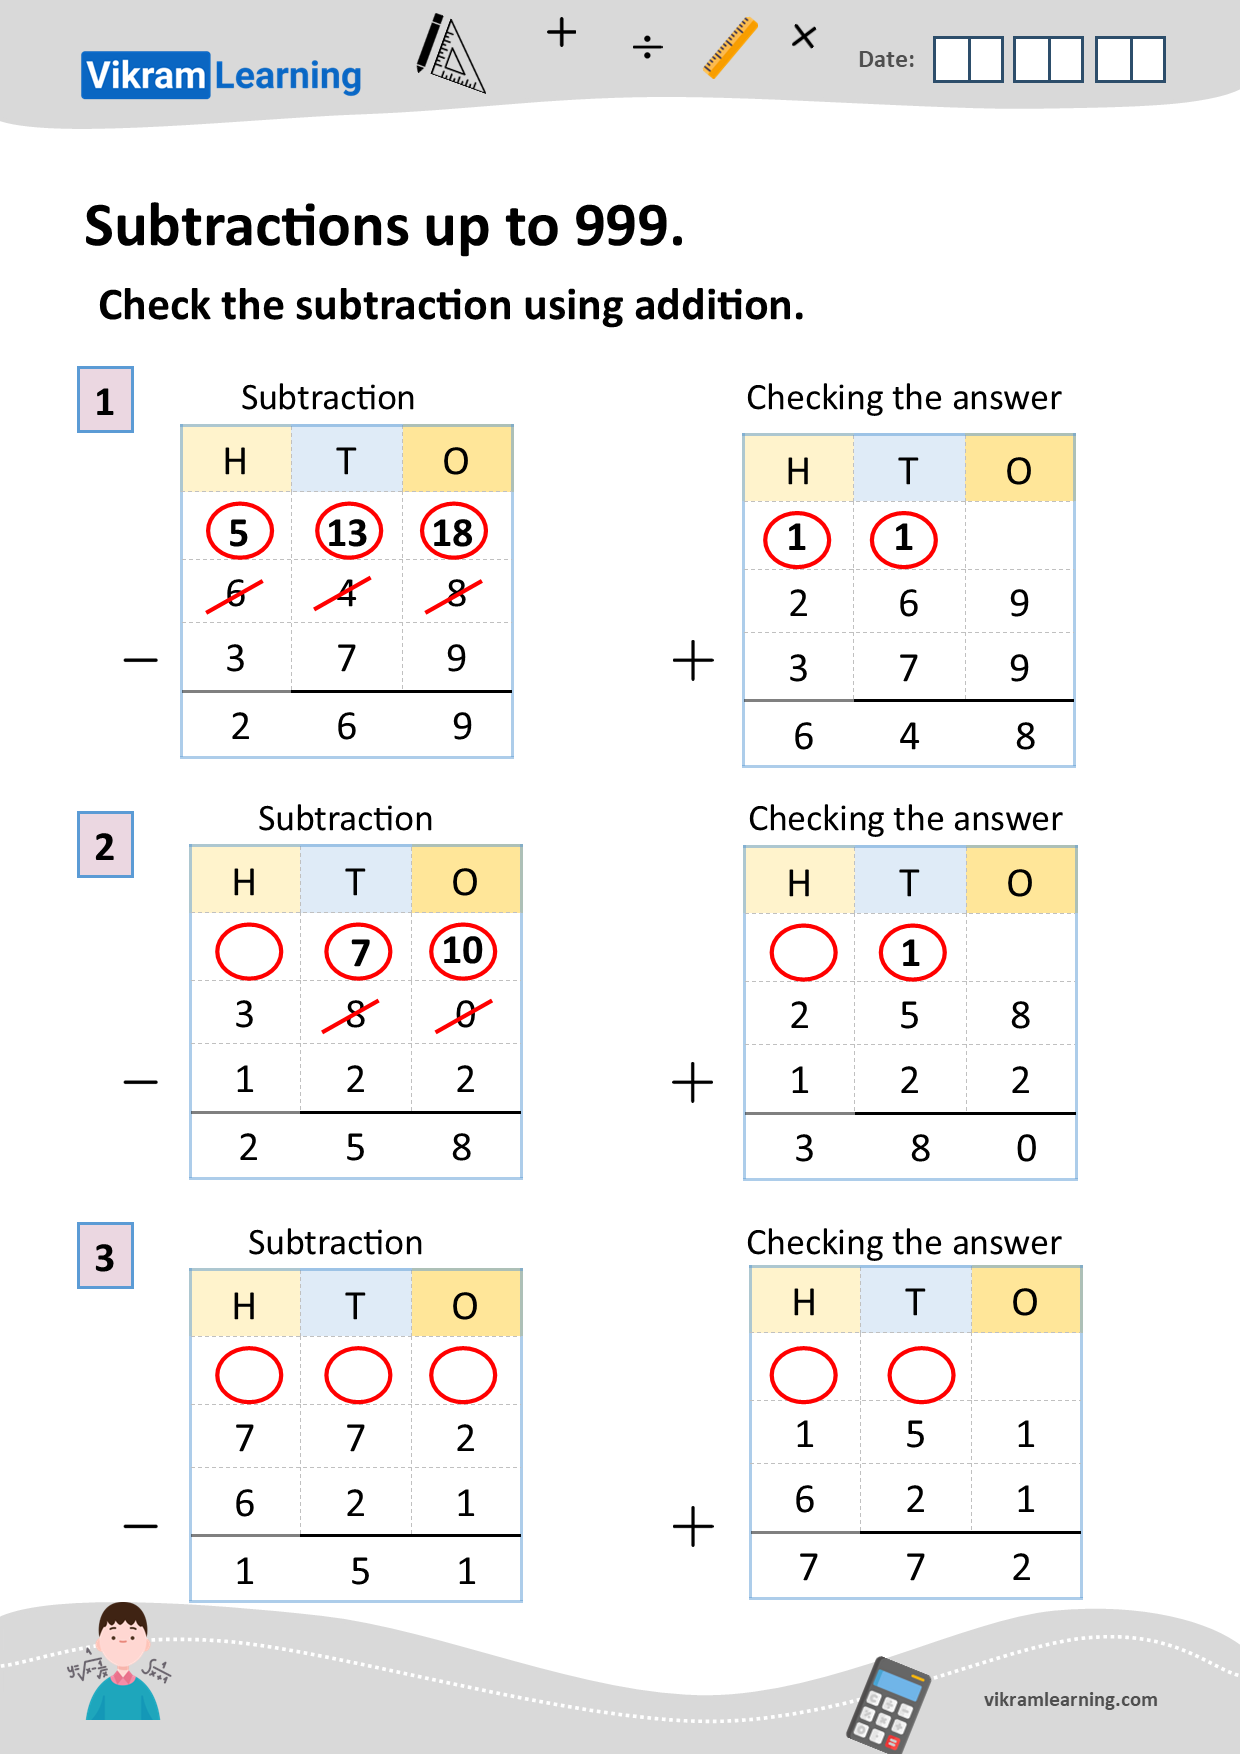 Download subtractions up to 999 worksheets